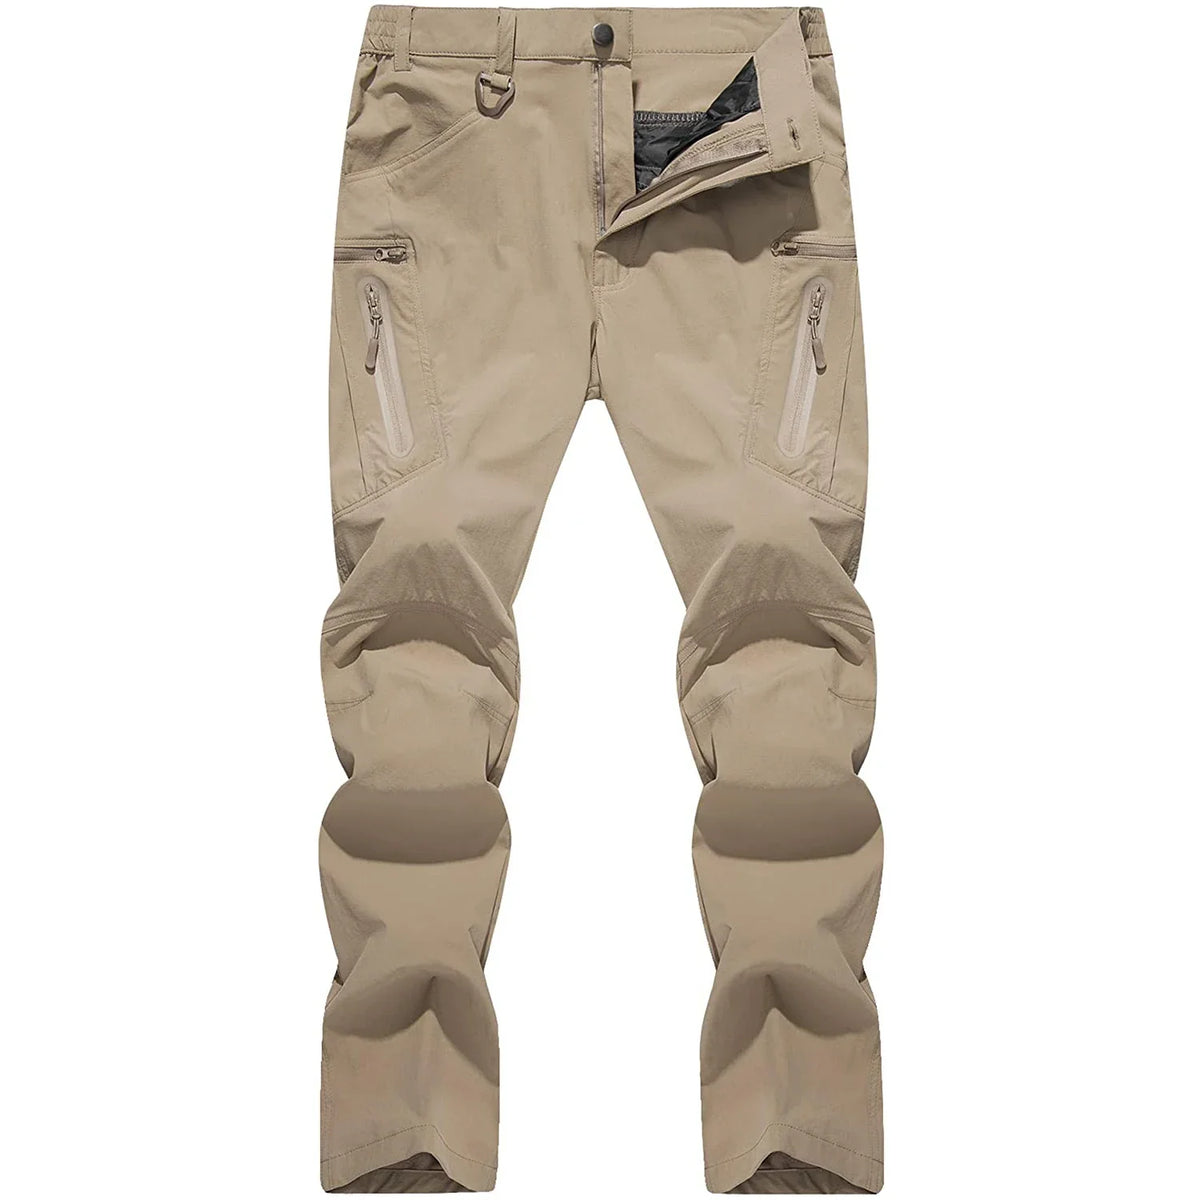 DryCamp Tactical Trousers